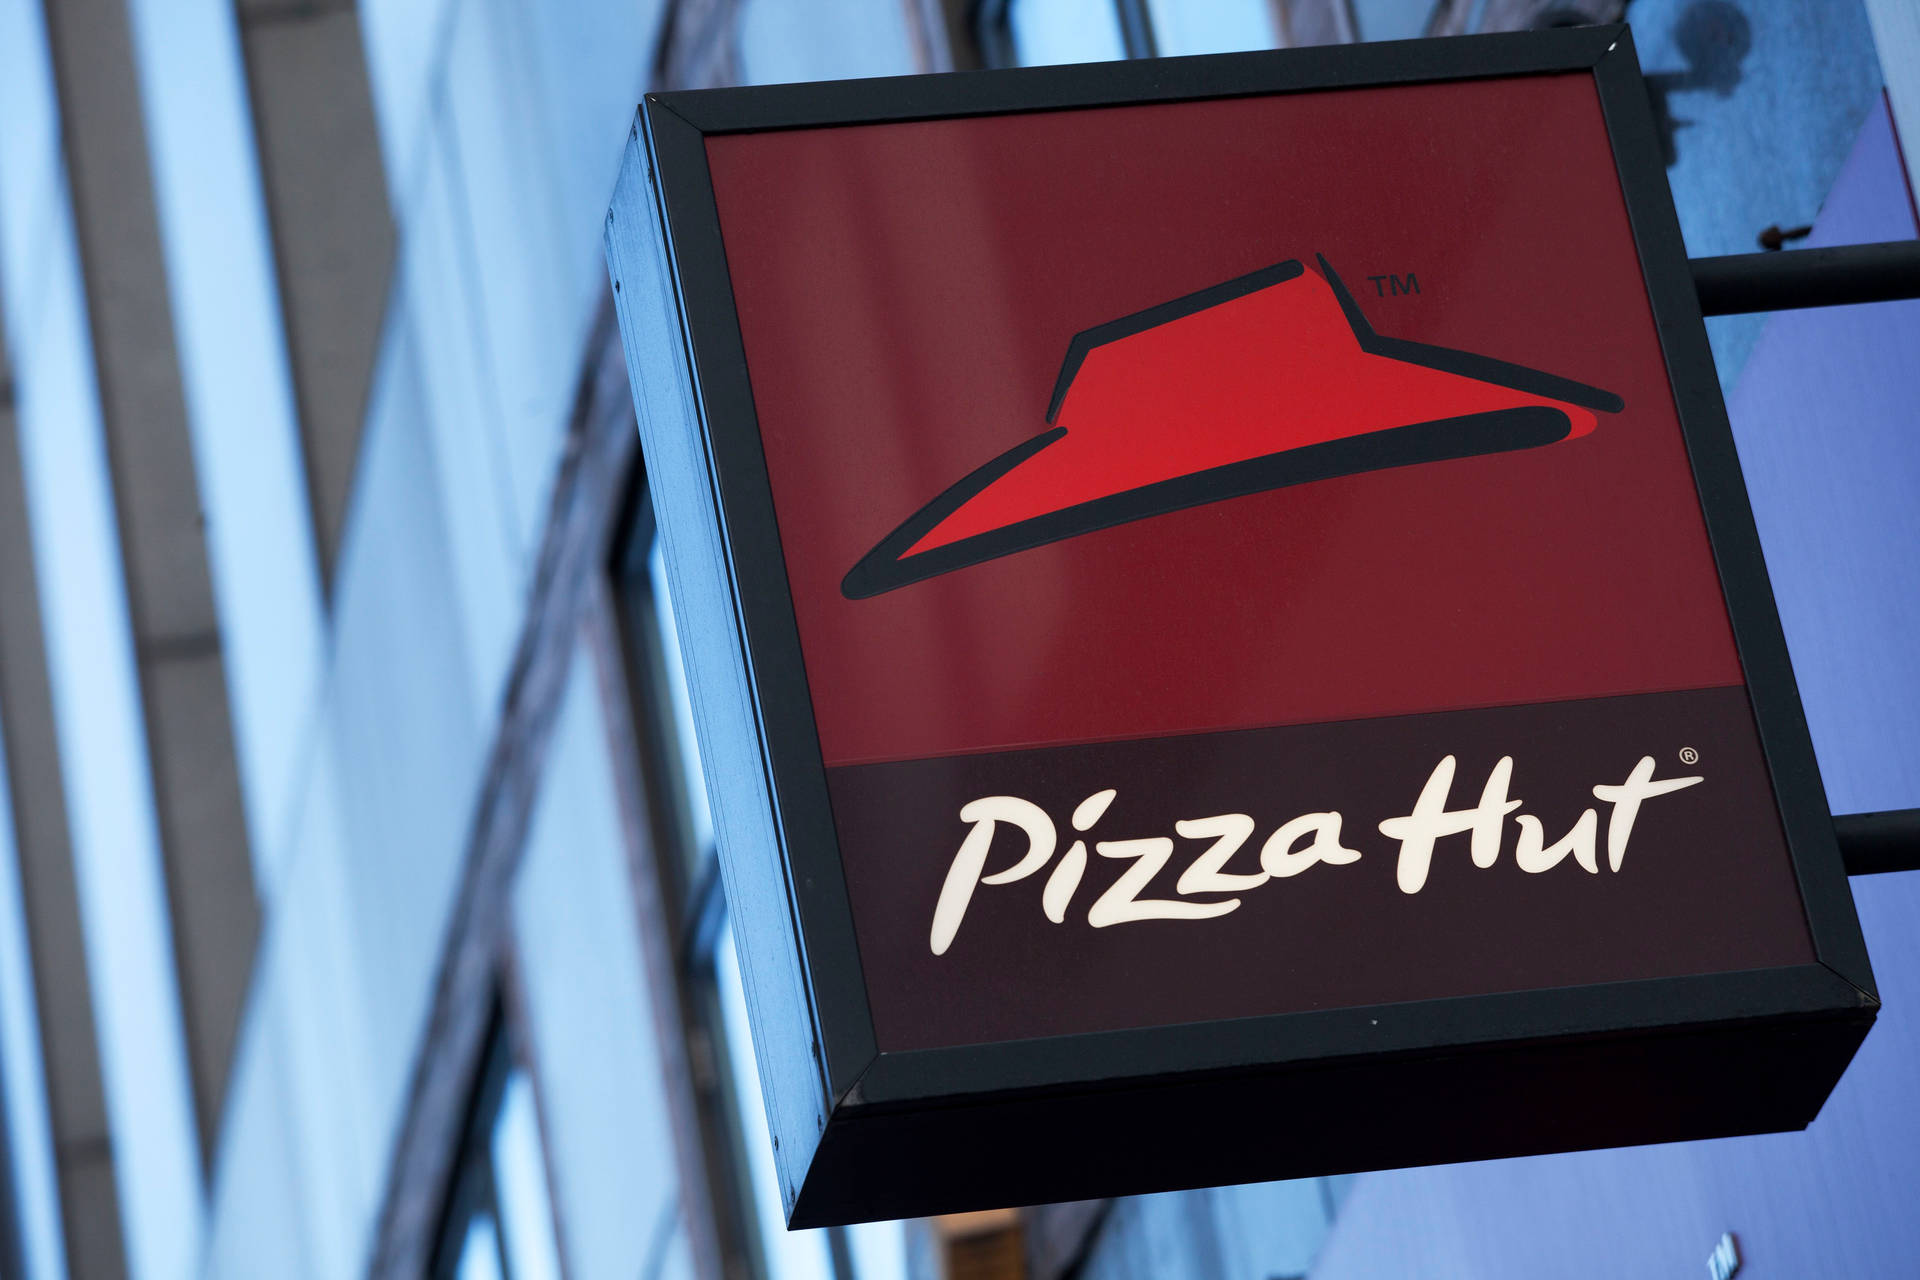 Pizza Hut Projecting Signage Background